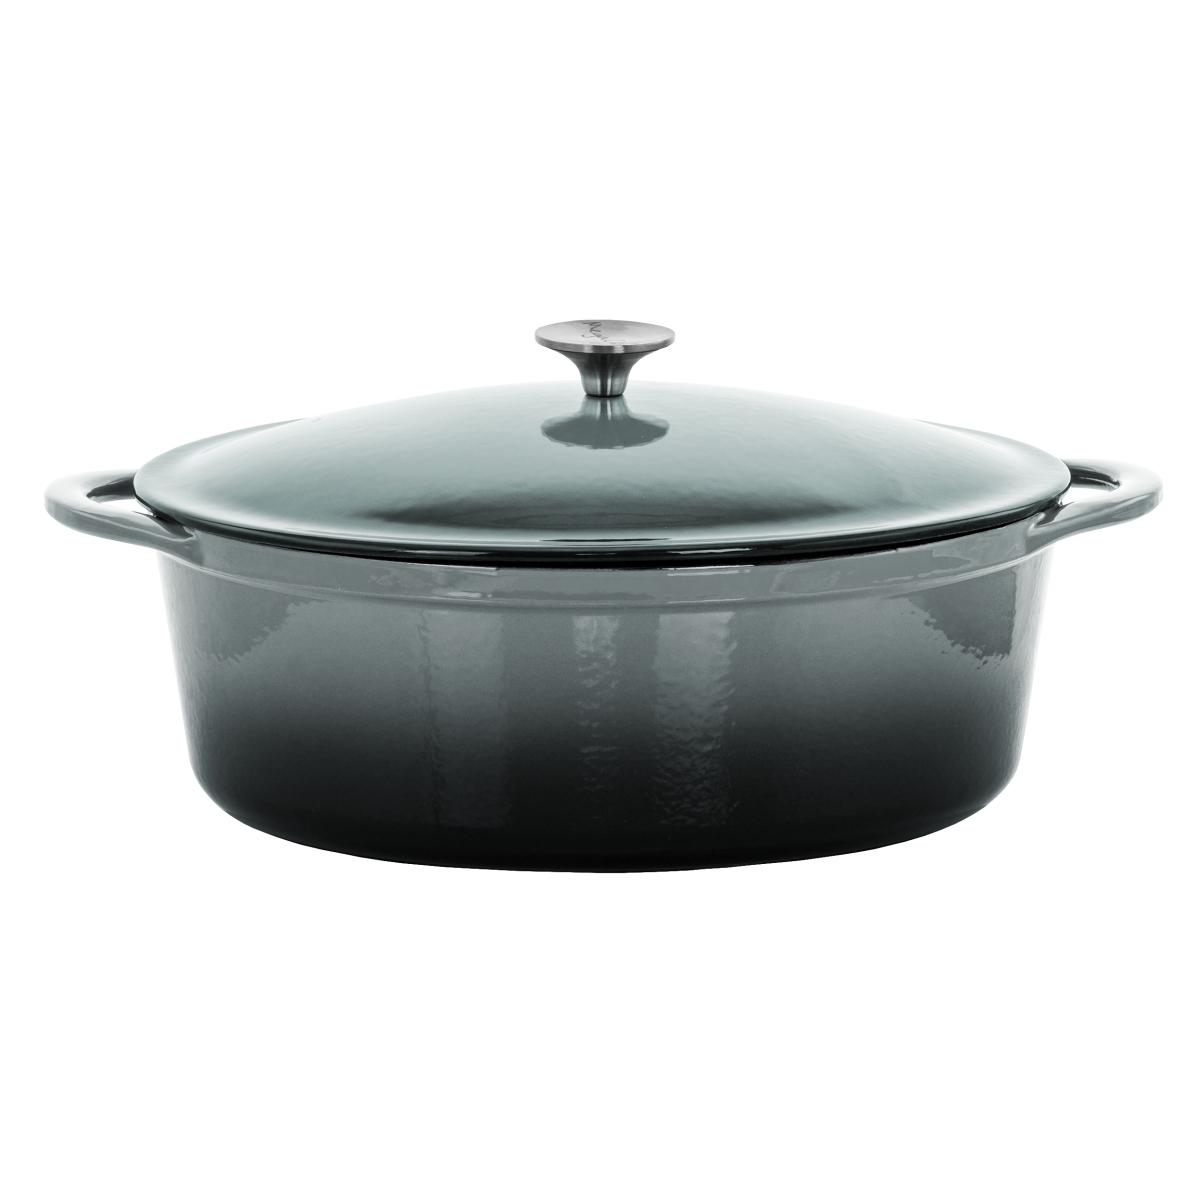 Picture of Megachef MG-CO33AG 7 qt. Oval Enameled Cast Iron Casserole, Gray